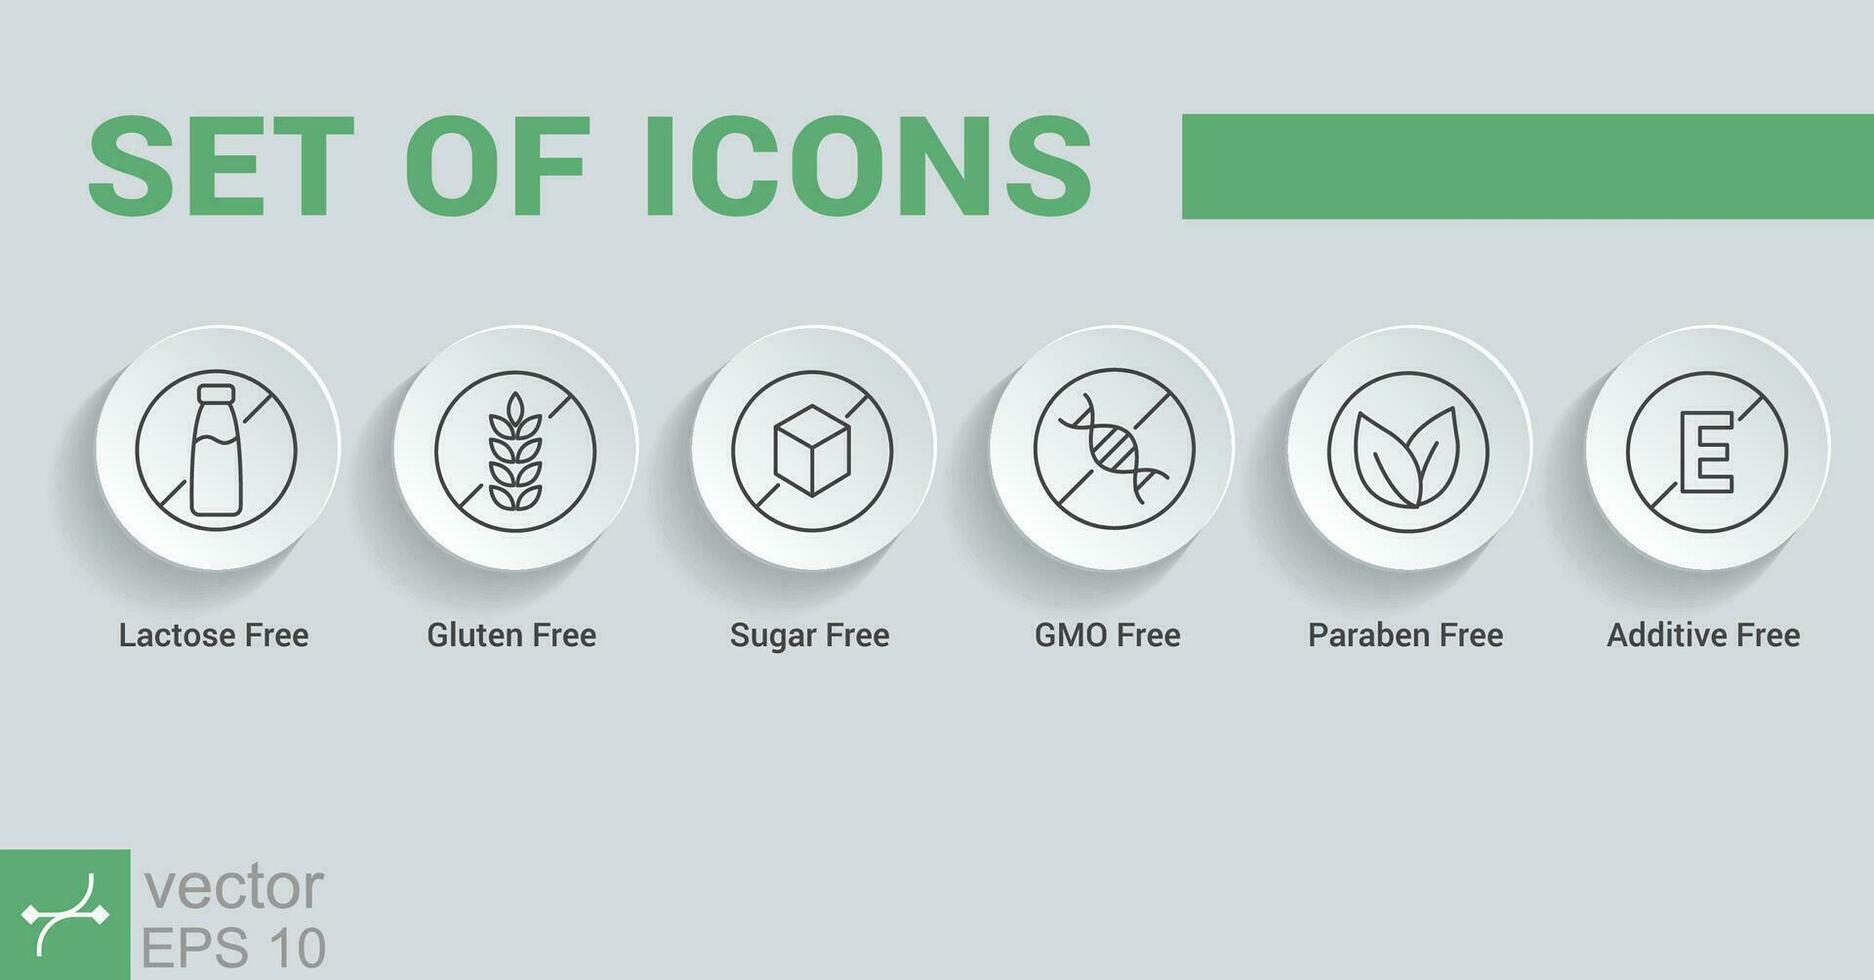 Set of common allergens icon. Simple outline style. Gluten free, lactose free, GMO free, Paraben, food additive, sugar free. Thin line vector illustration isolated. EPS 10.